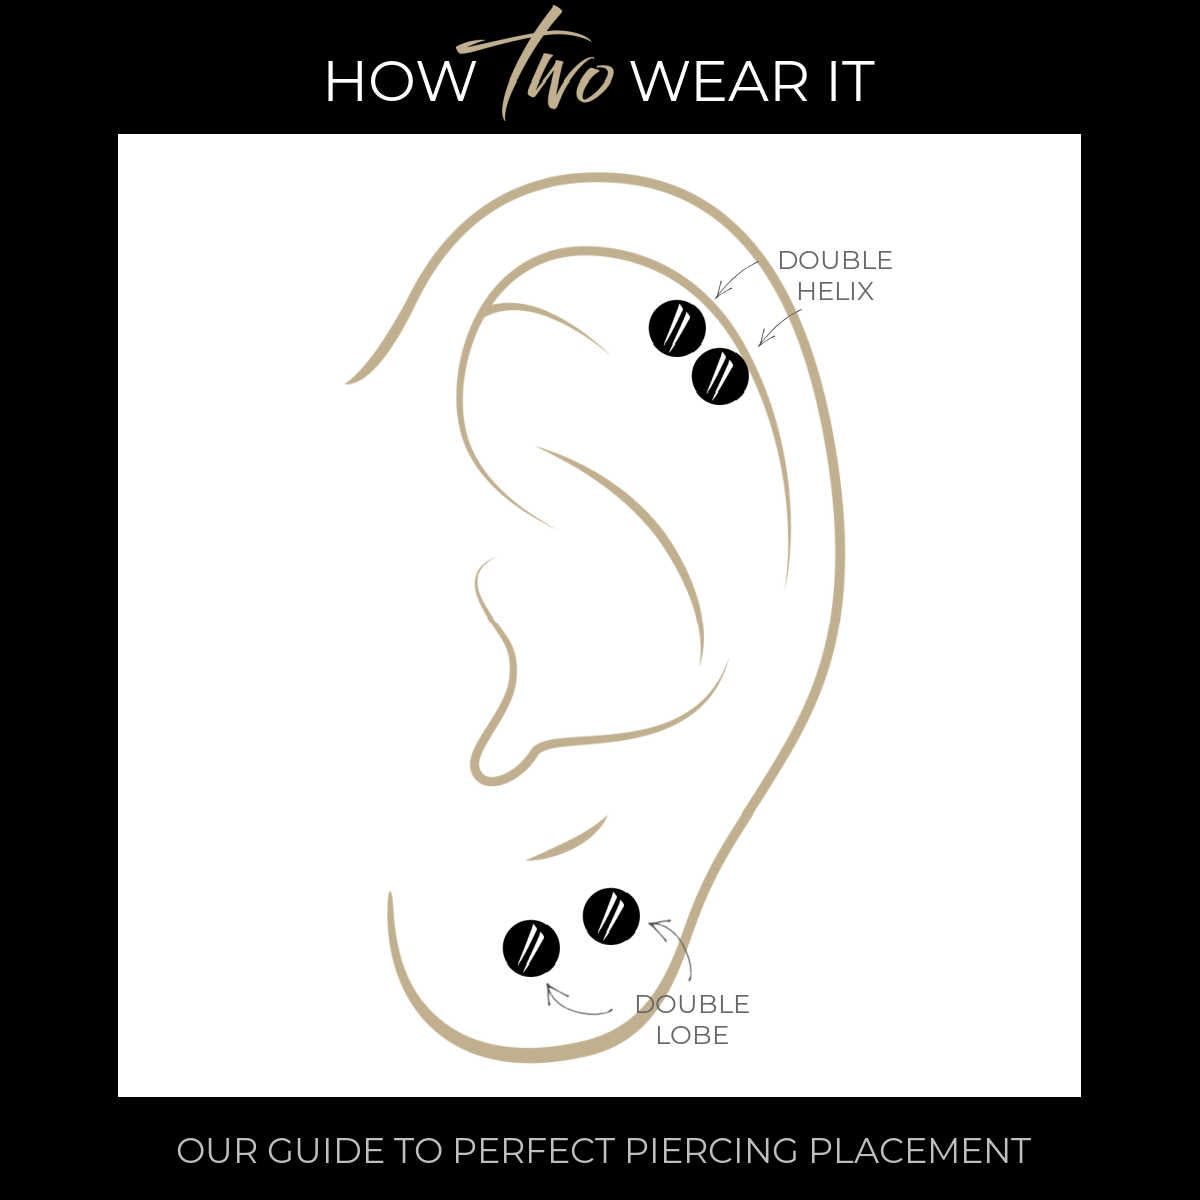 Infographic - Helix, Lobe Double Piercing Stud Earring Placement, Two of Most Fine Jewelry